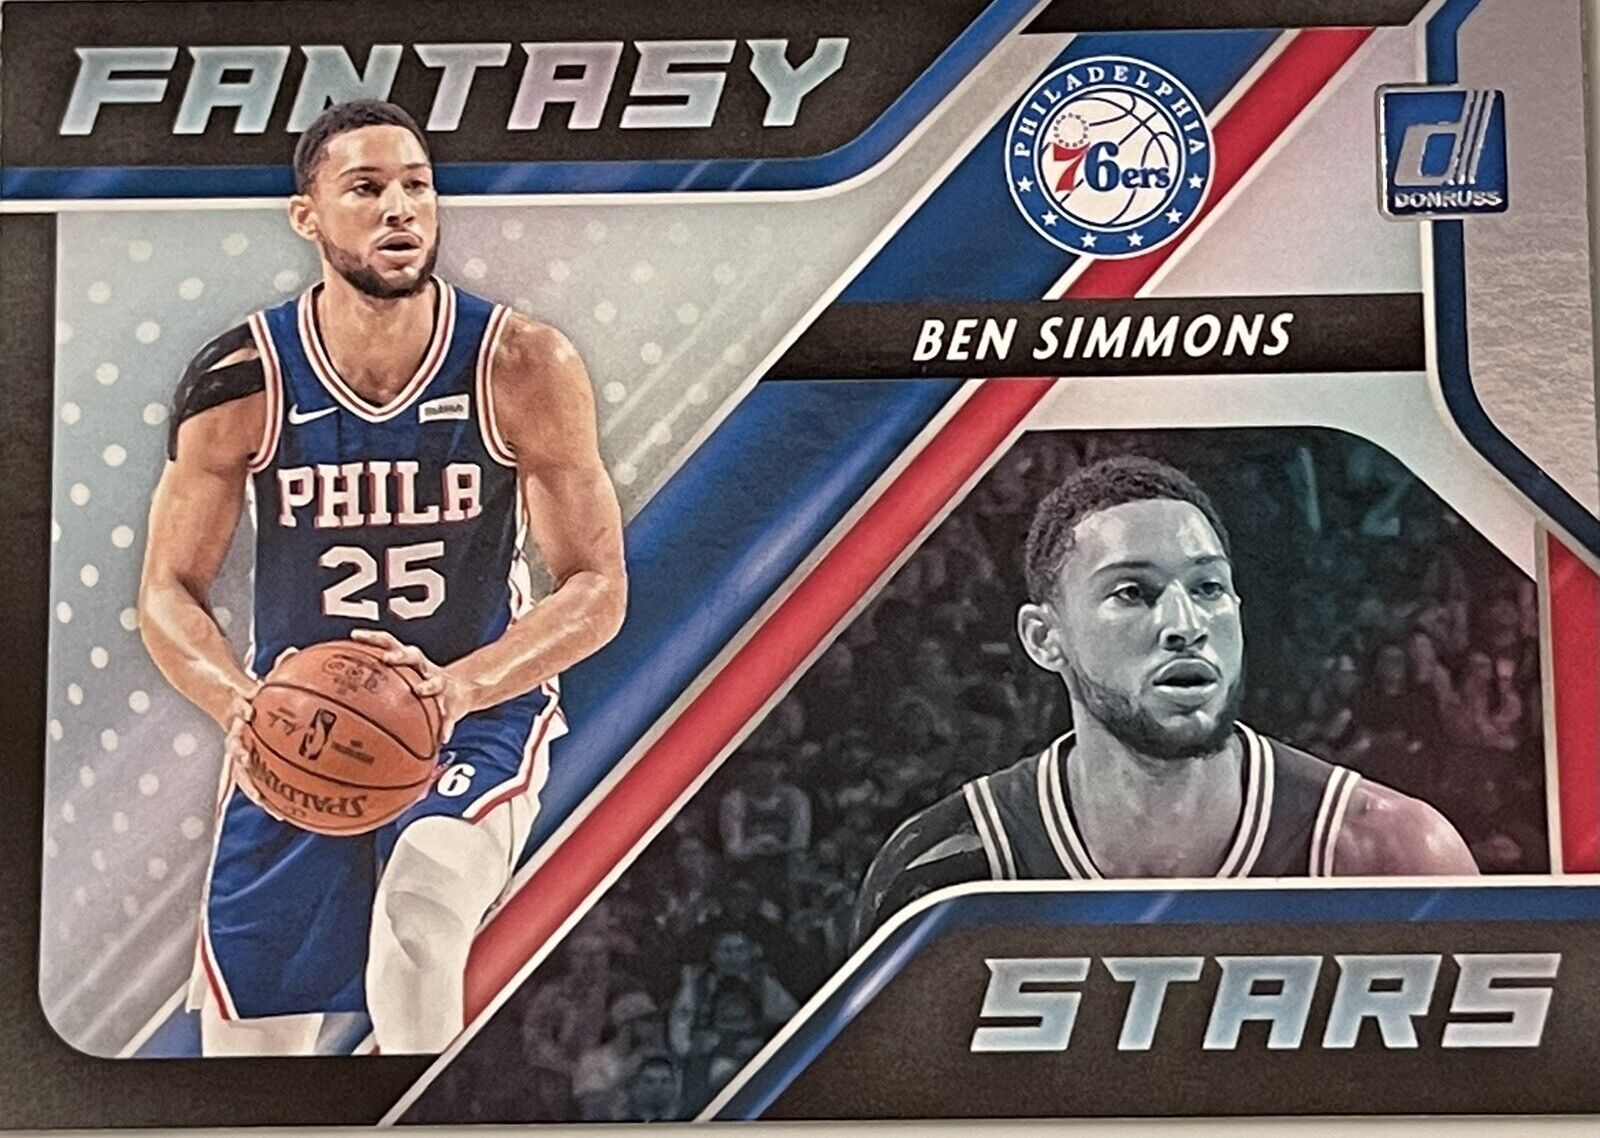 Primary image for BEN SIMMONS Fantasy Stars 2020-21 Panini Donruss Basketball Card Mint #4 76ers